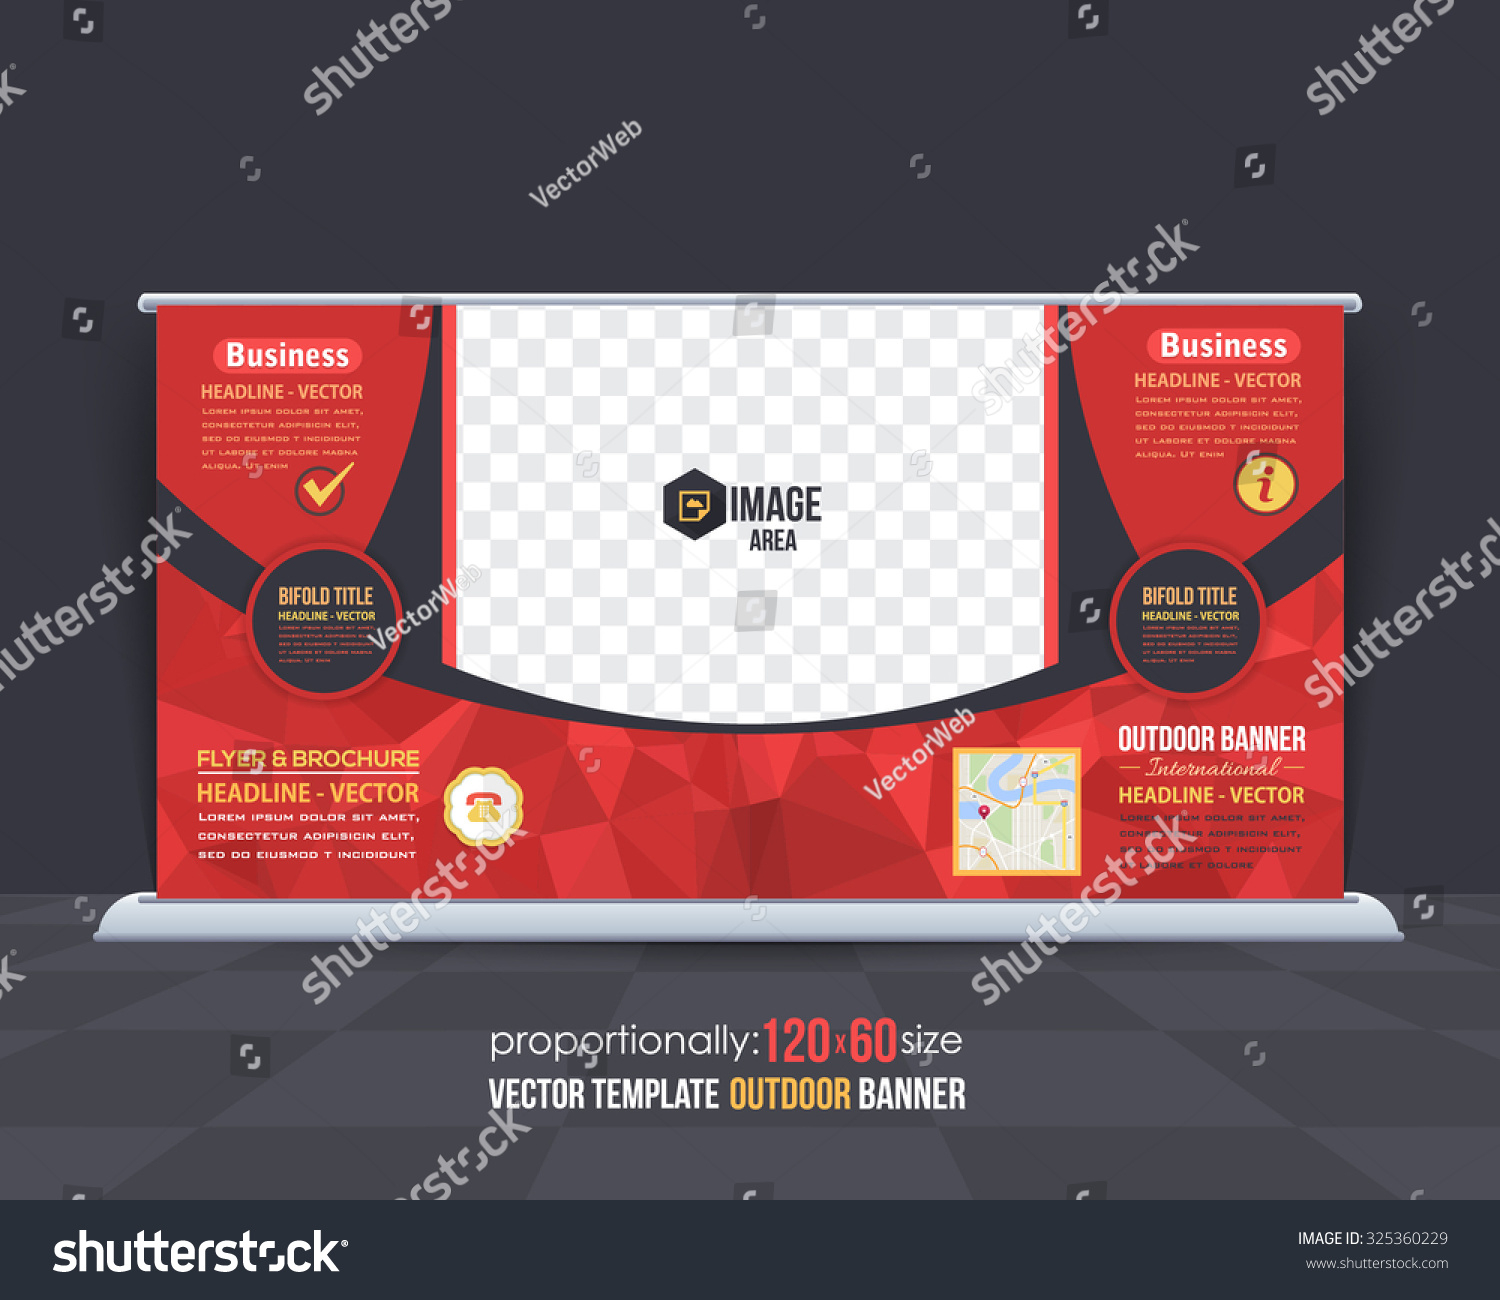 Business Theme Outdoor Banner Horizontal Website: Stock  Pertaining To Outdoor Banner Template